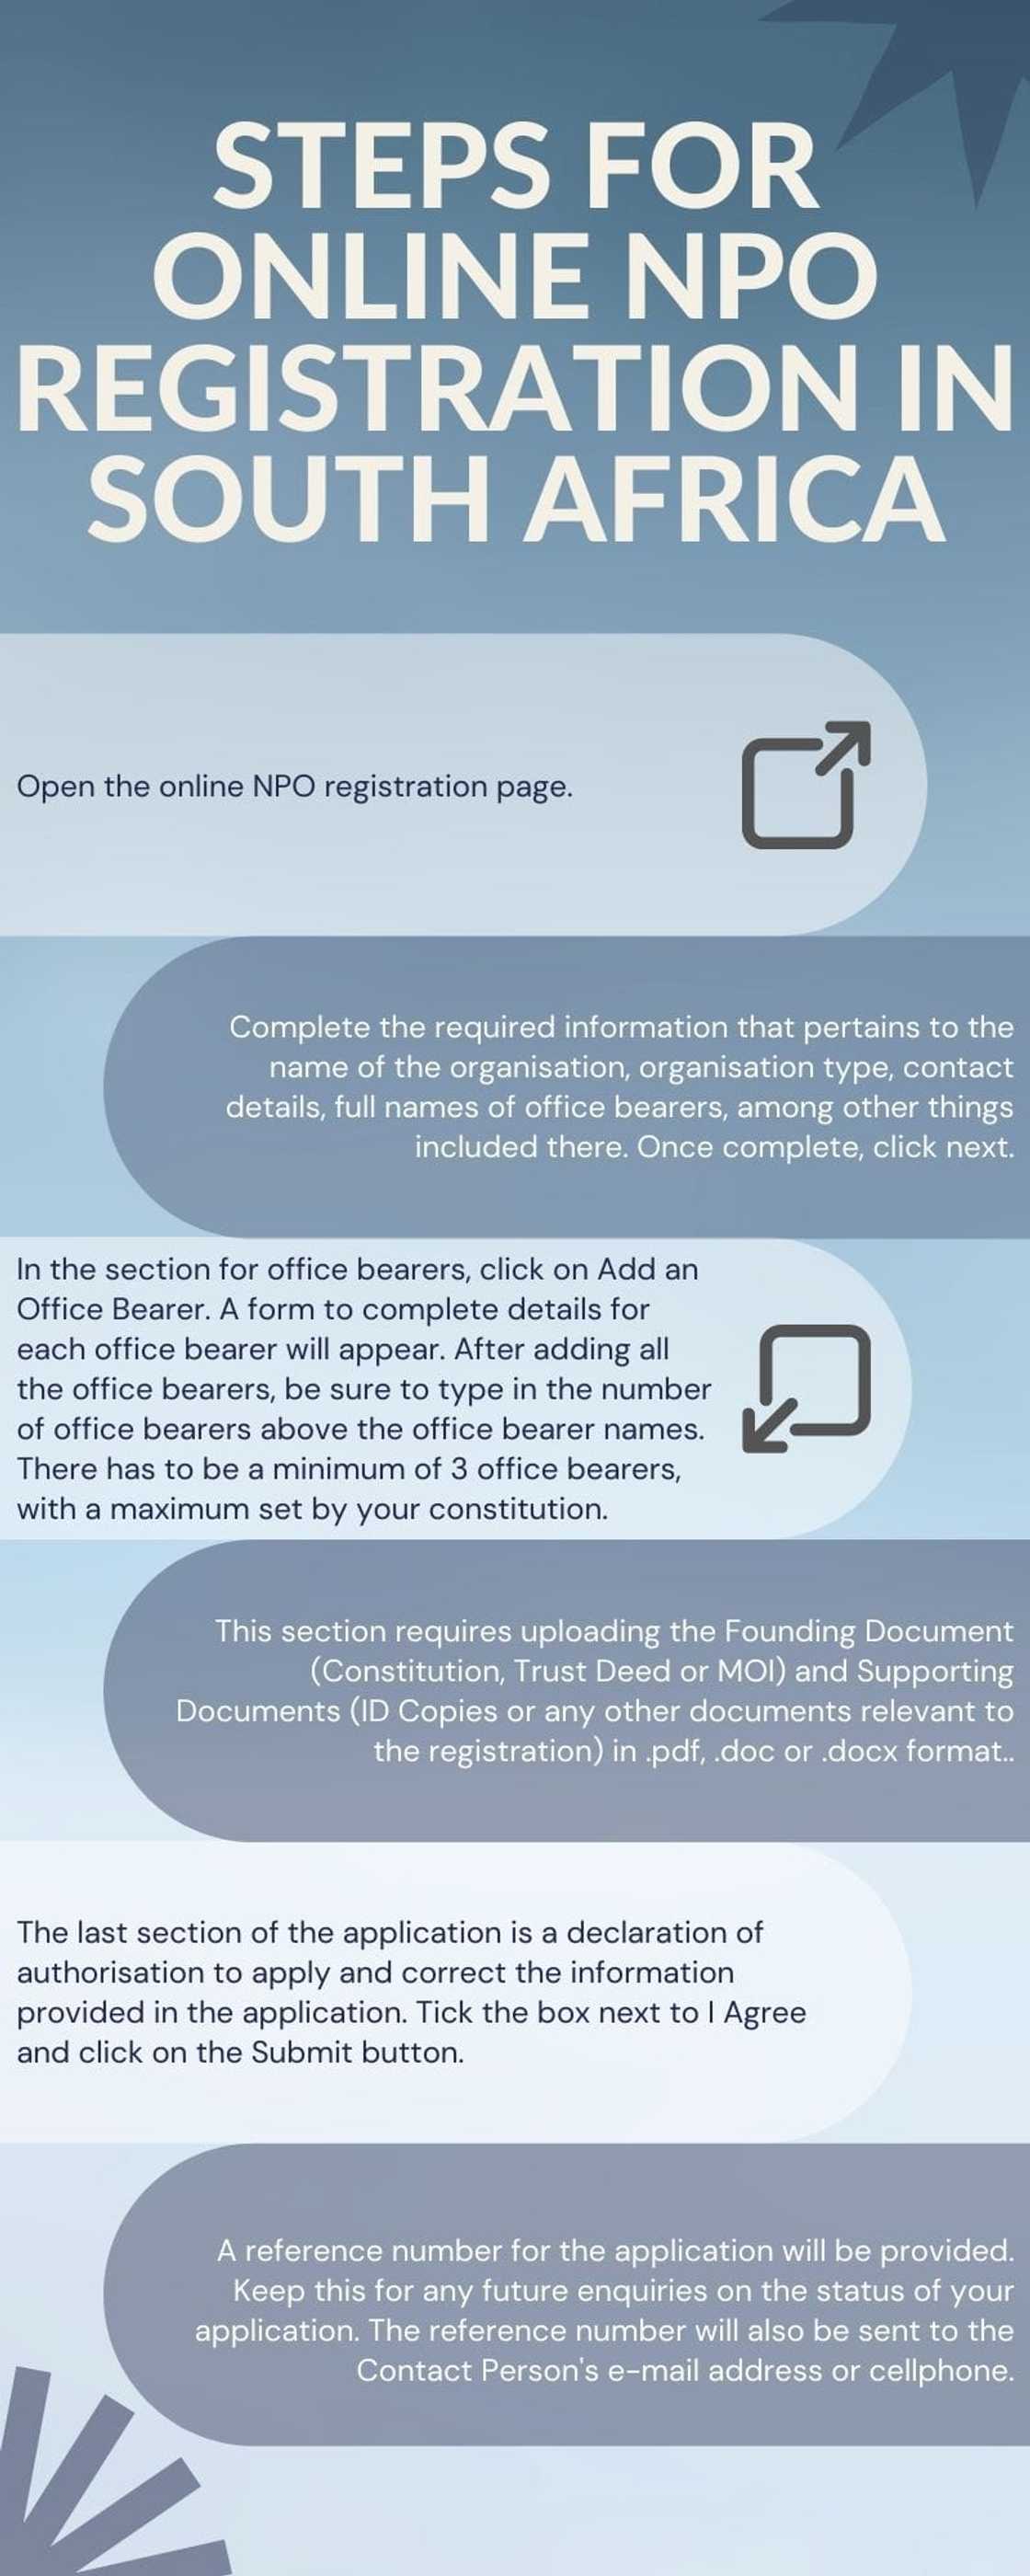 NPO registration step-by-step guide 2021